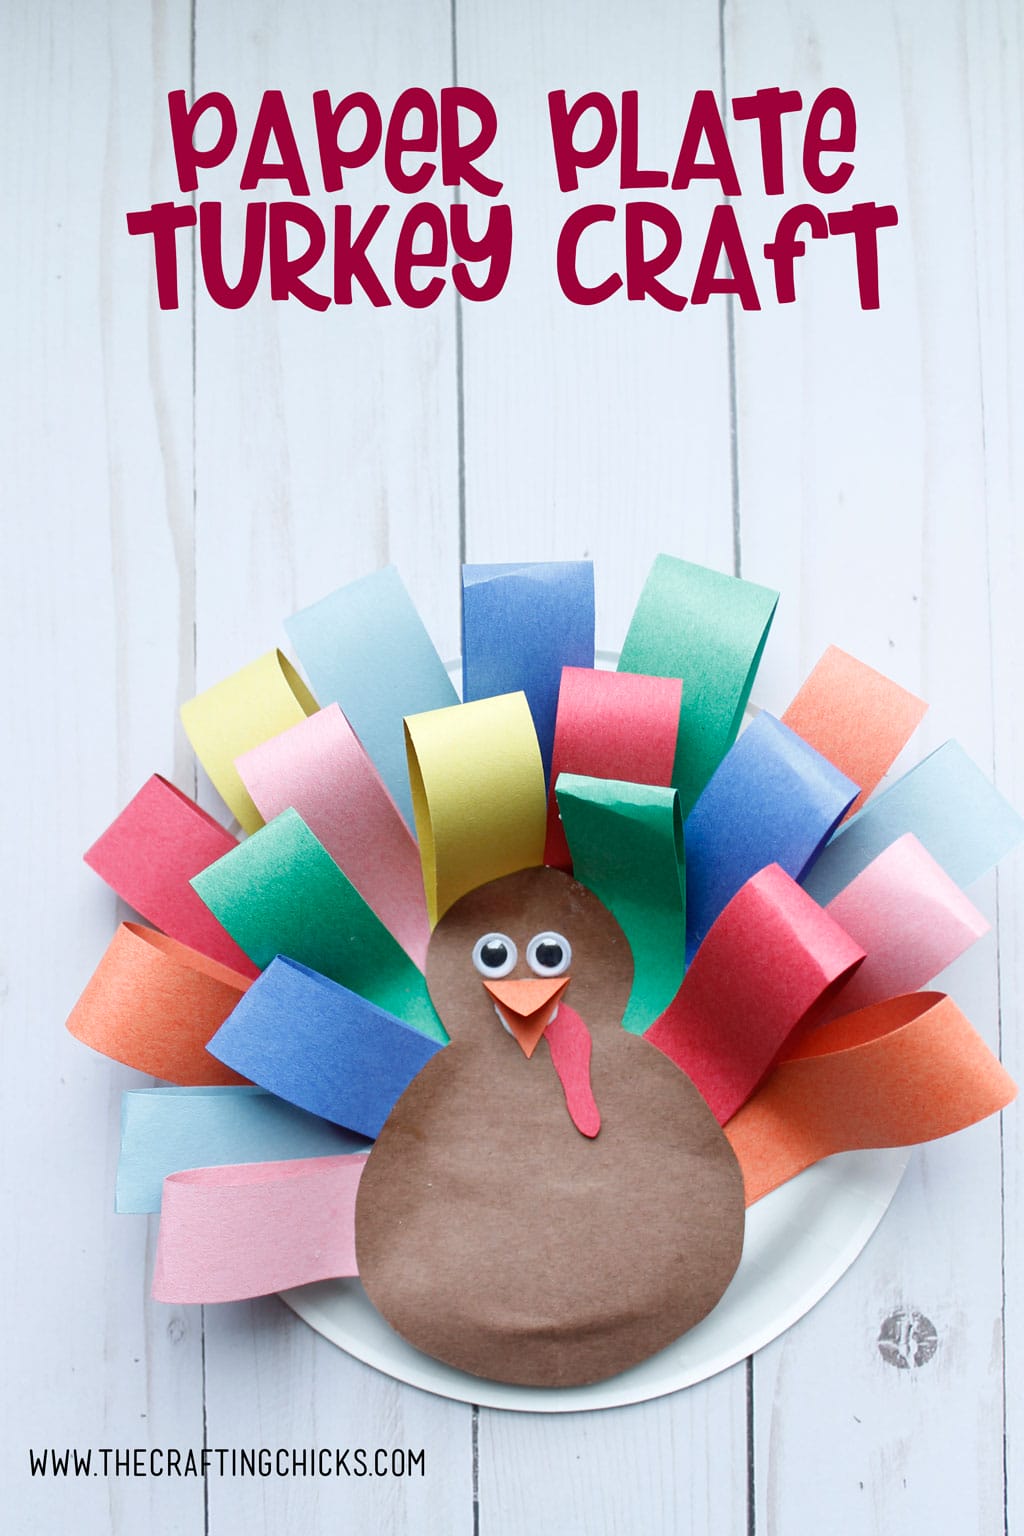 Paper Plate Turkey Craft is a great kids craft. This craft is easy enough for preschoolers to put together and helps them develop fine motor skills. #thanksgivingcraftsforkids #paperplatecrafts